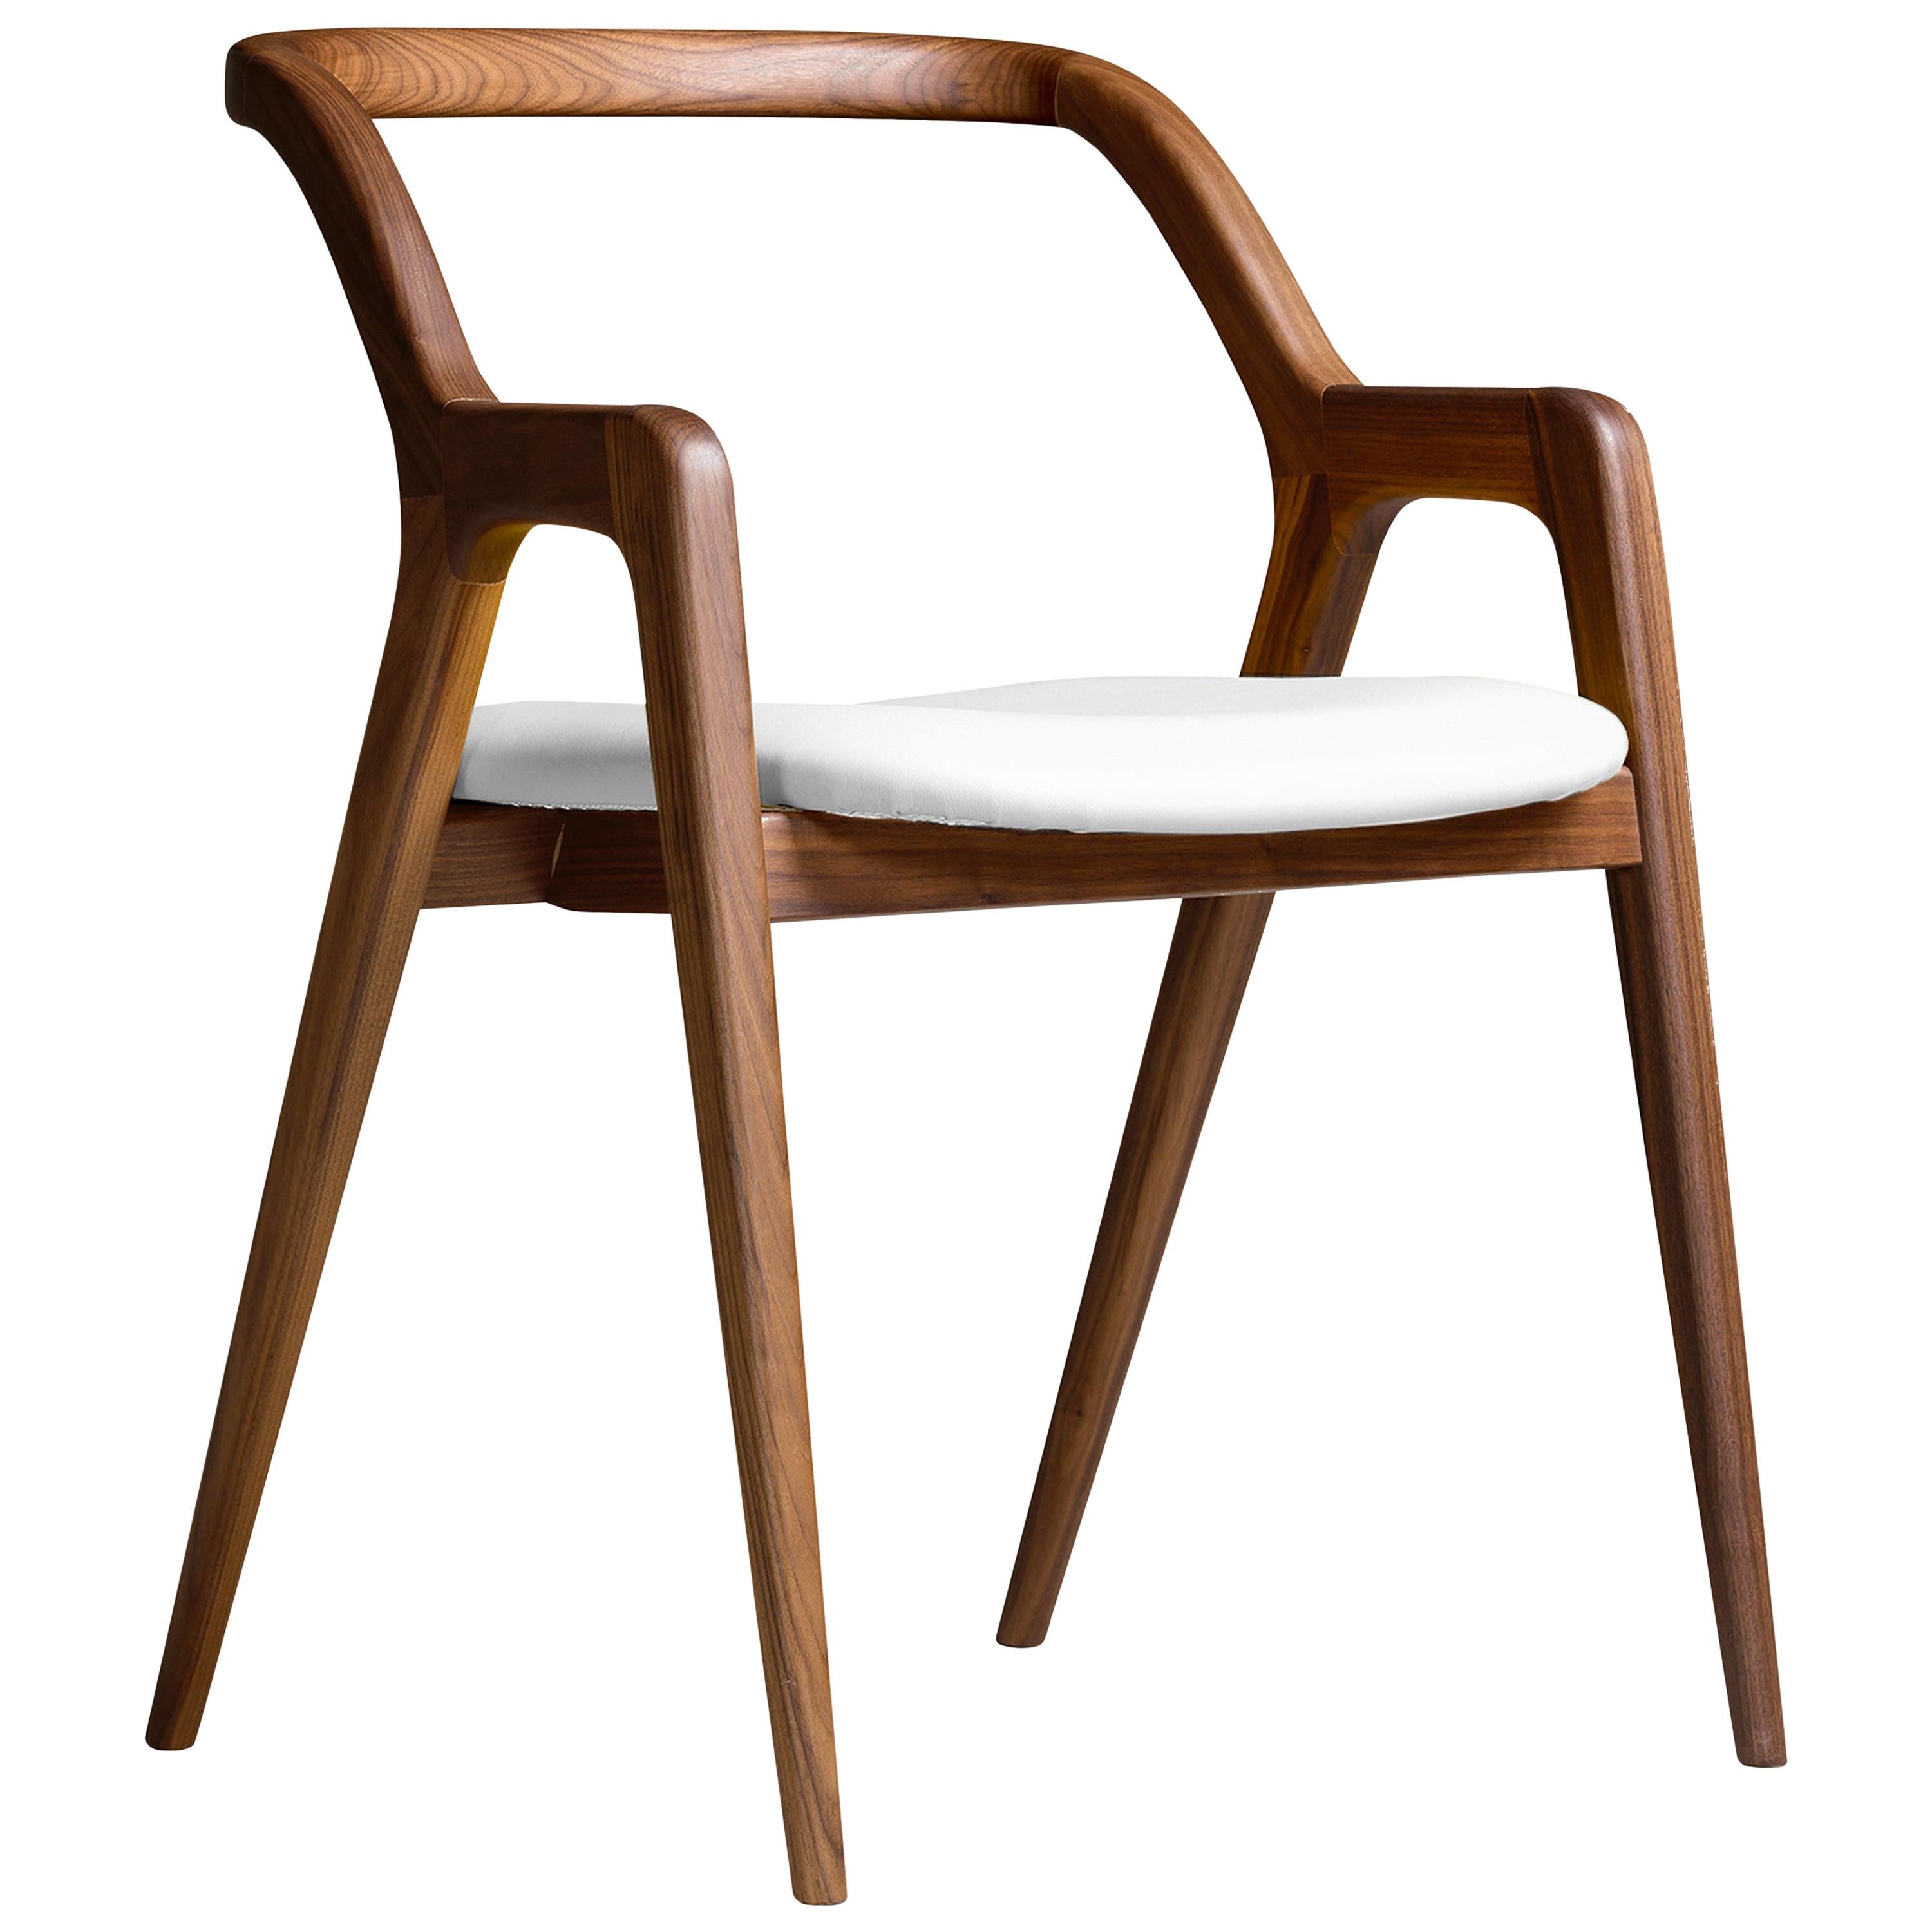 In breve Solid Wood Chair, Walnut in Hand-Made Natural Finish, Contemporary For Sale